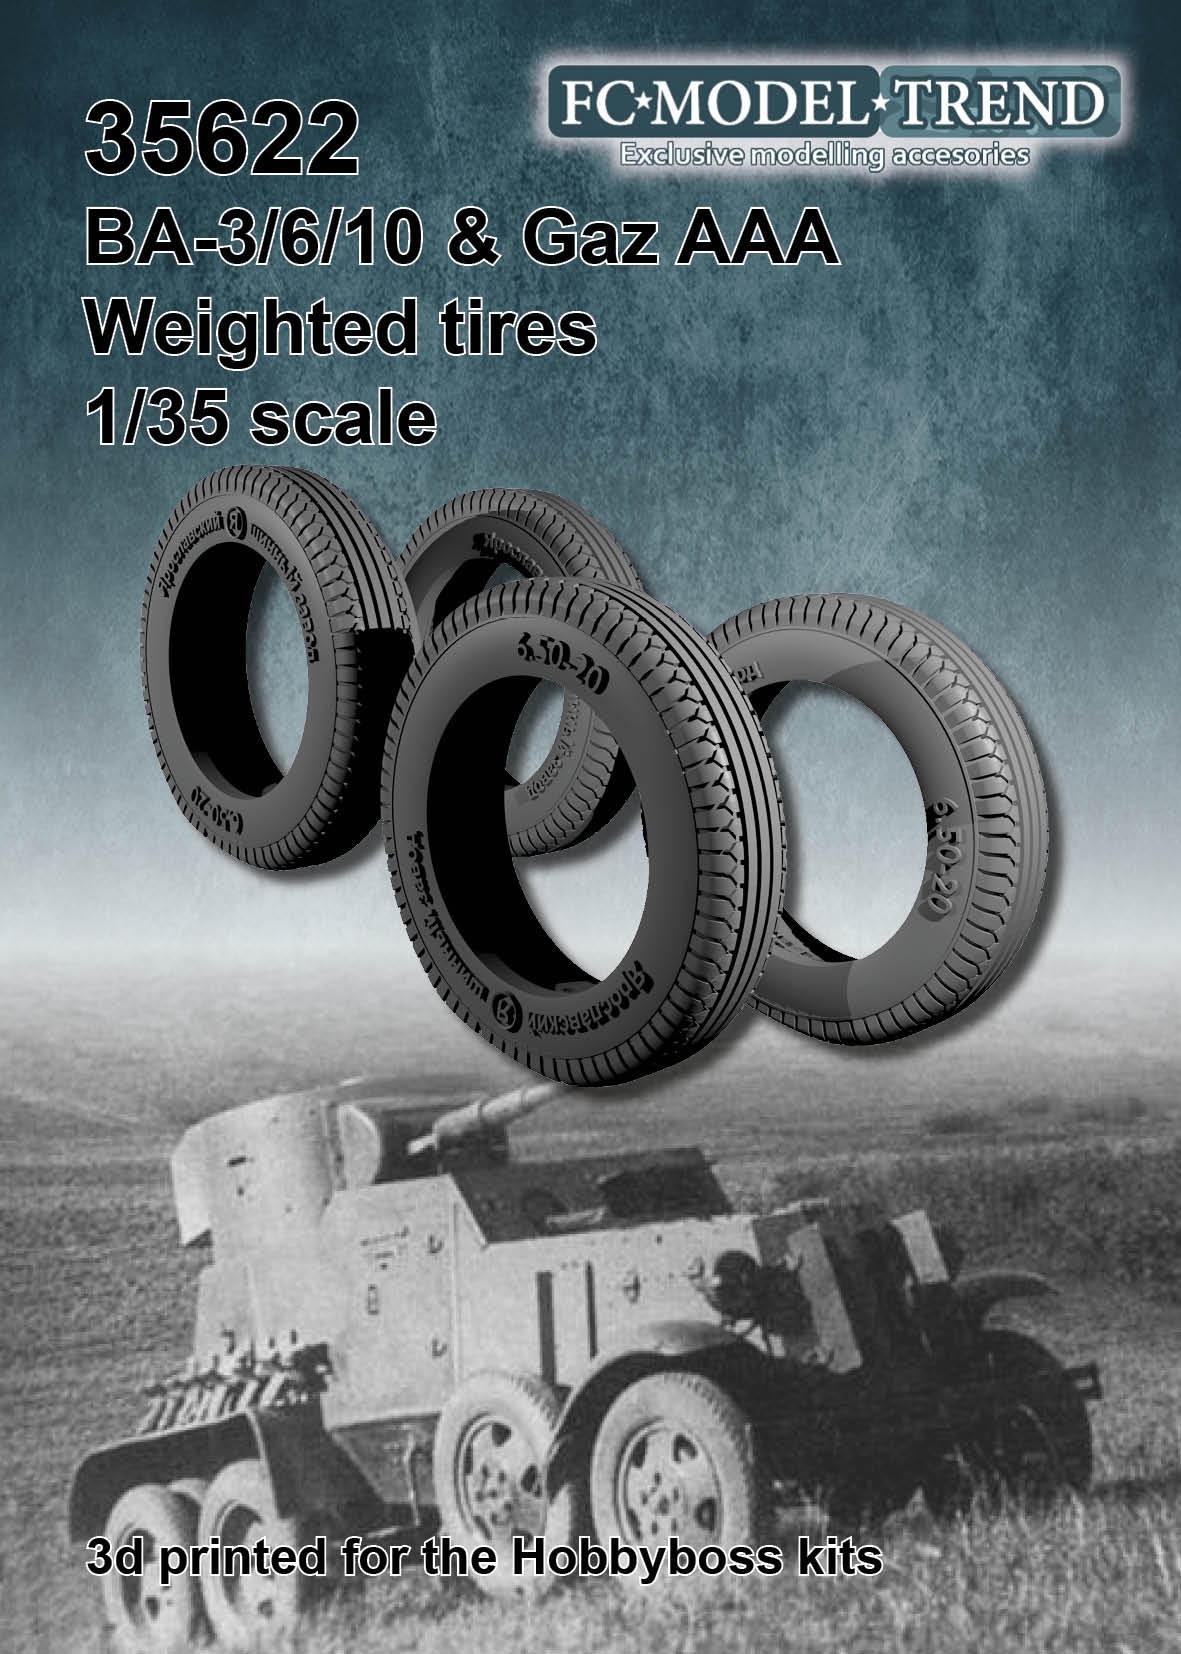 BA-3 weighted wheels, resin cast 1/35 scale for the Hobbyboss kit